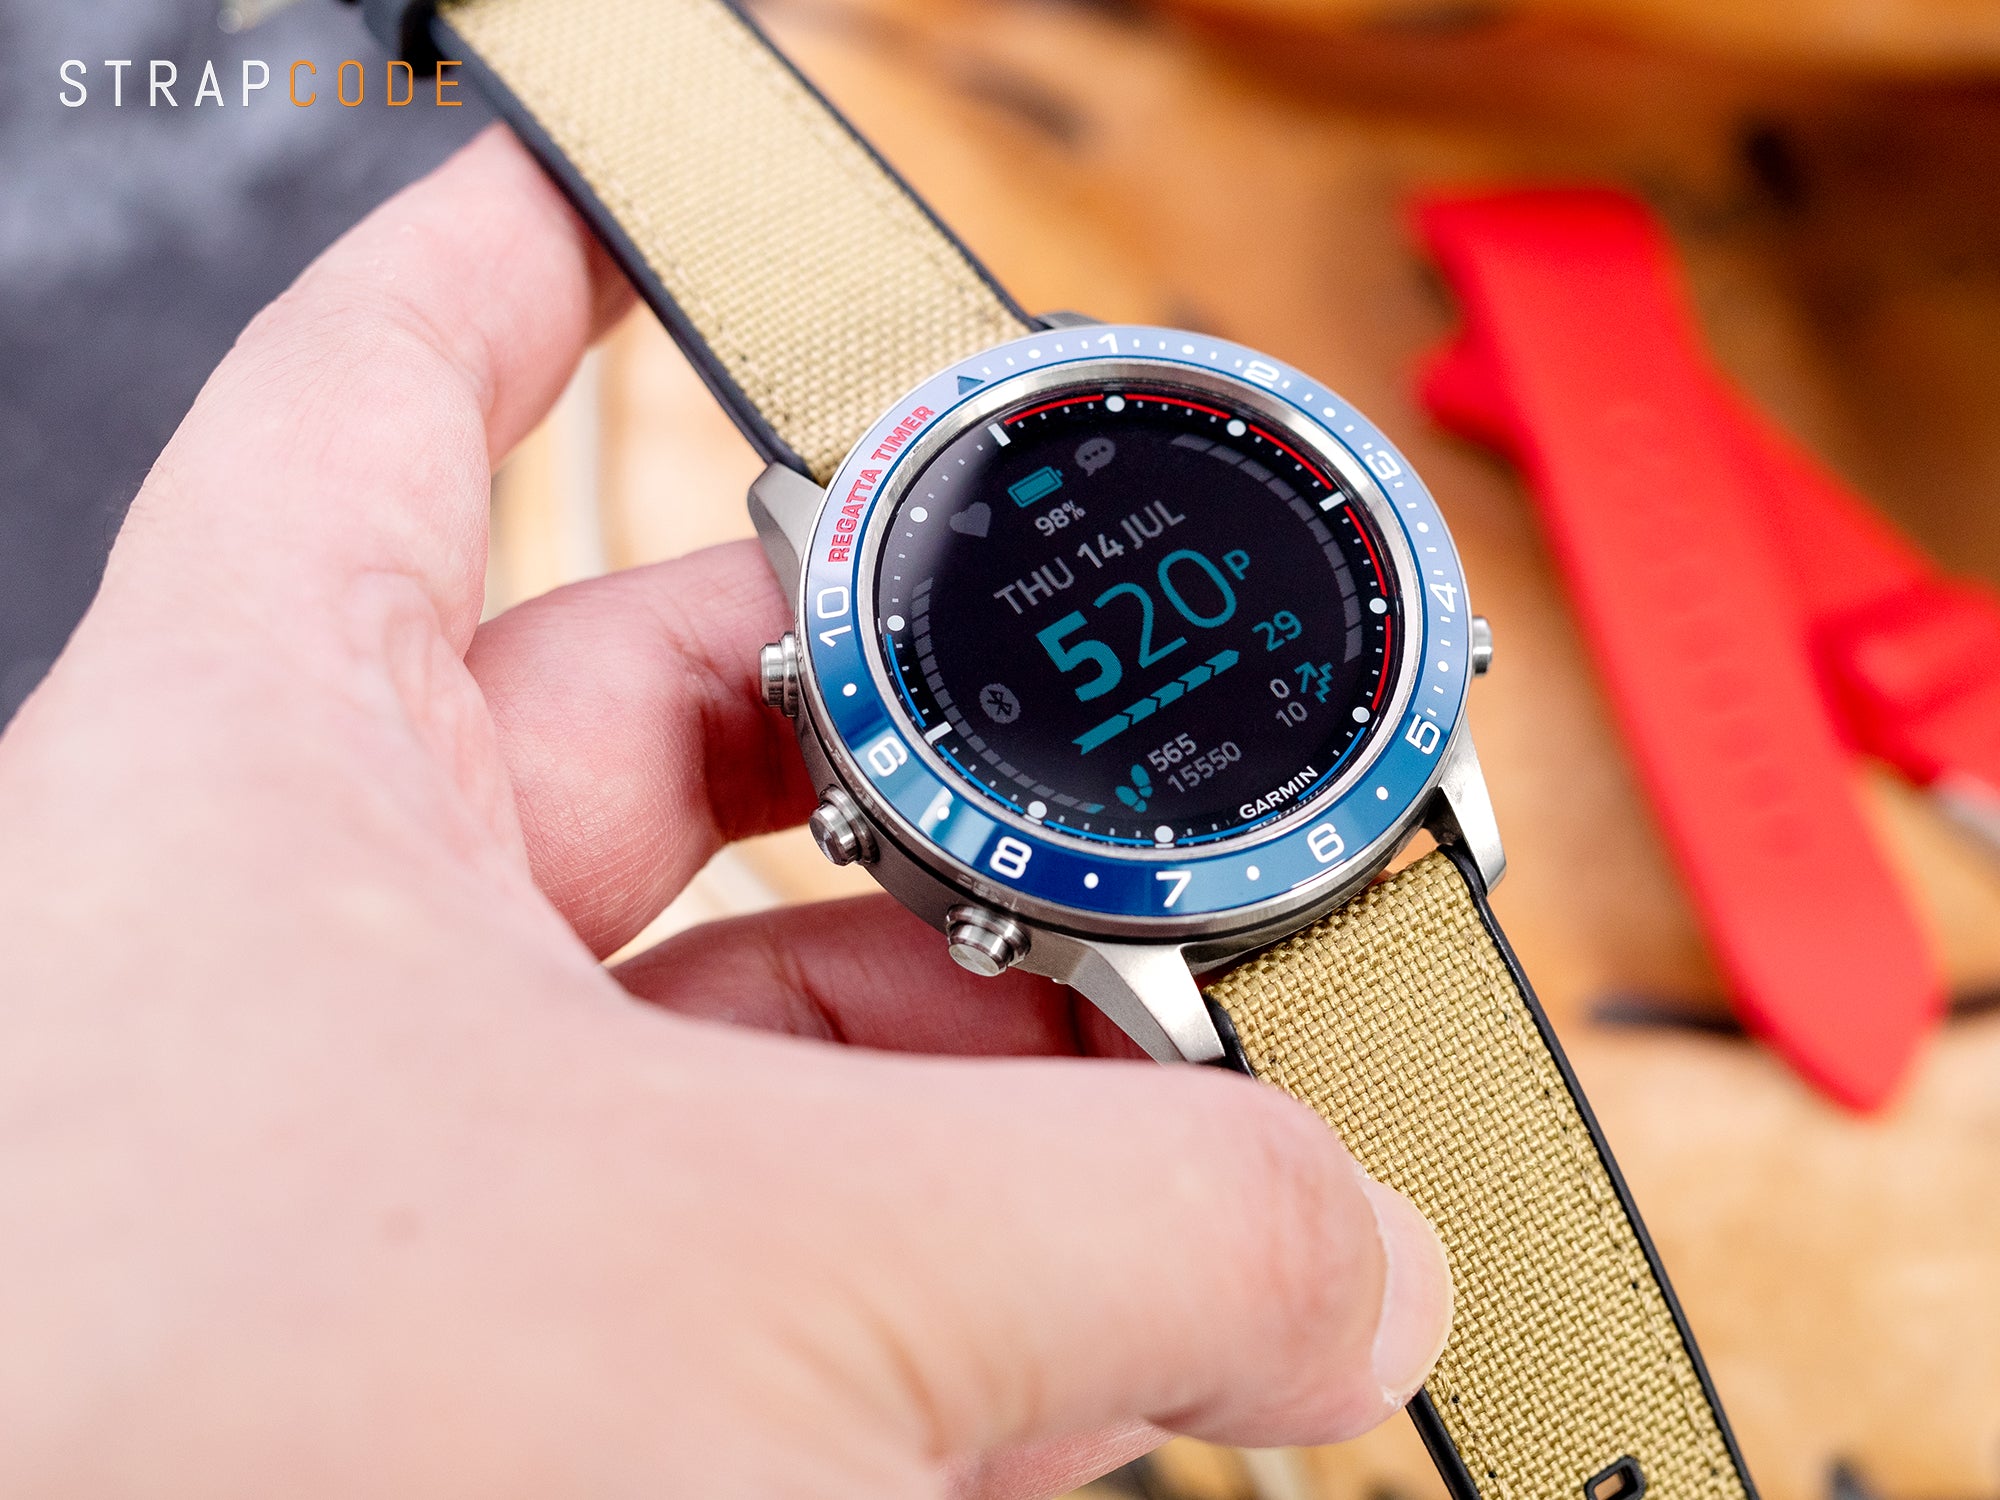 Garmin Epix Gen 2 Review: The Smart Watch Carrying on the Baton of  Excellence